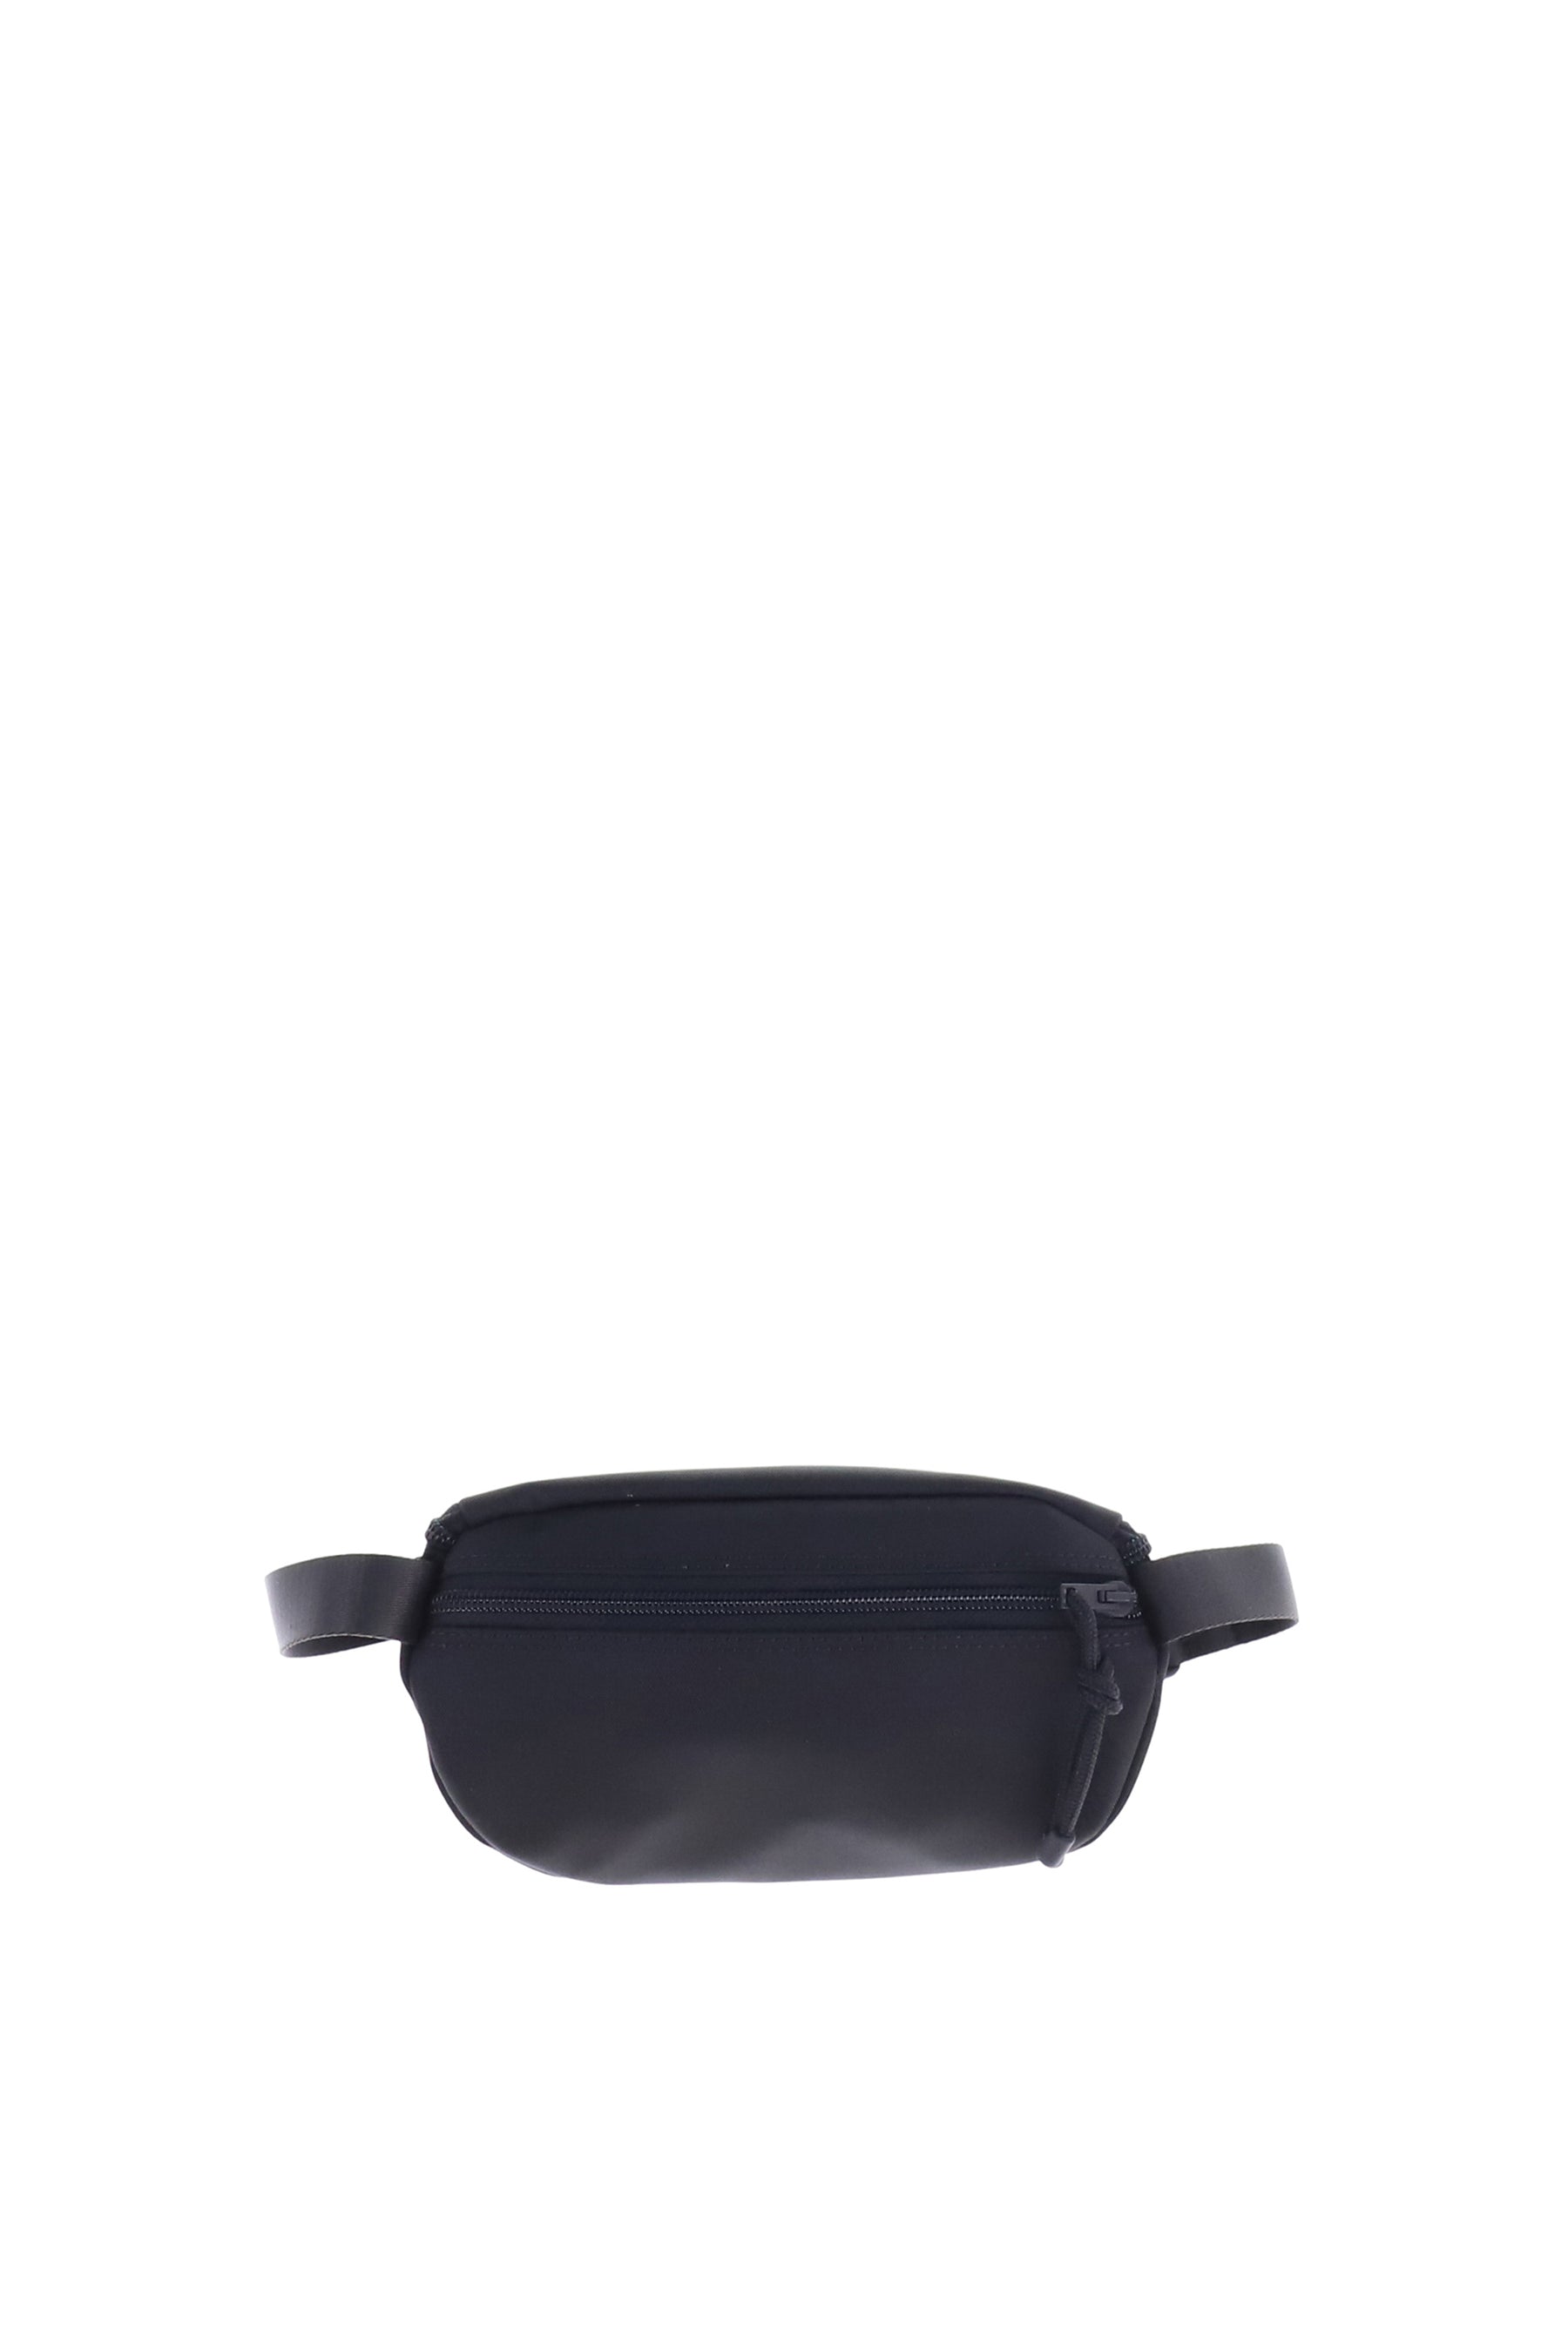 ANARCHY FANNY PACK / BLK